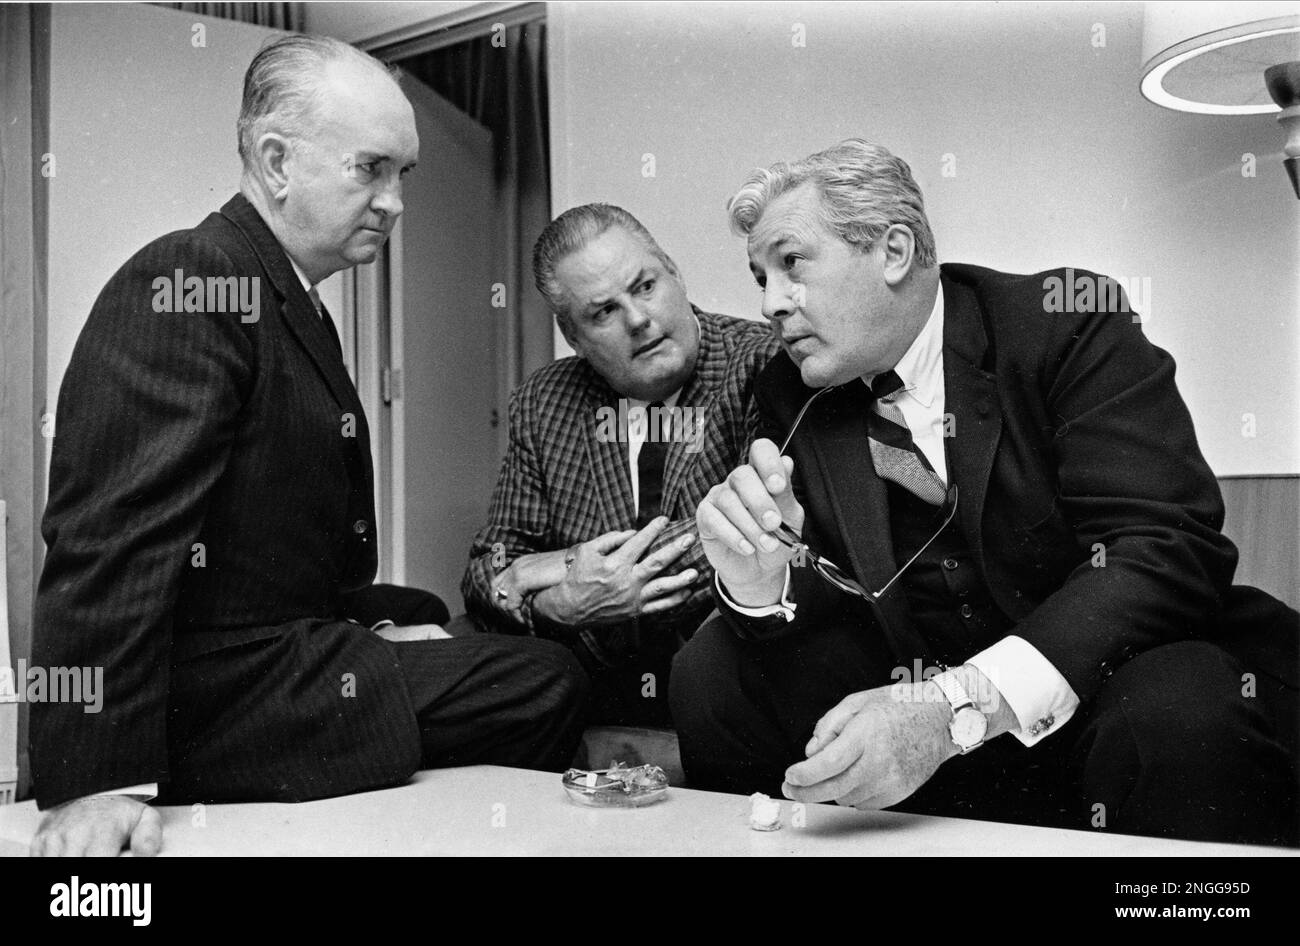 Jack Ruby's defense attorneys, from left, Tom Howard, Joe Tonahill, and  Melvin Belli, are shown in Dallas, Texas, Dec. 10, 1963. Beli, California  trial lawyer, has taken over as chief defense counsel